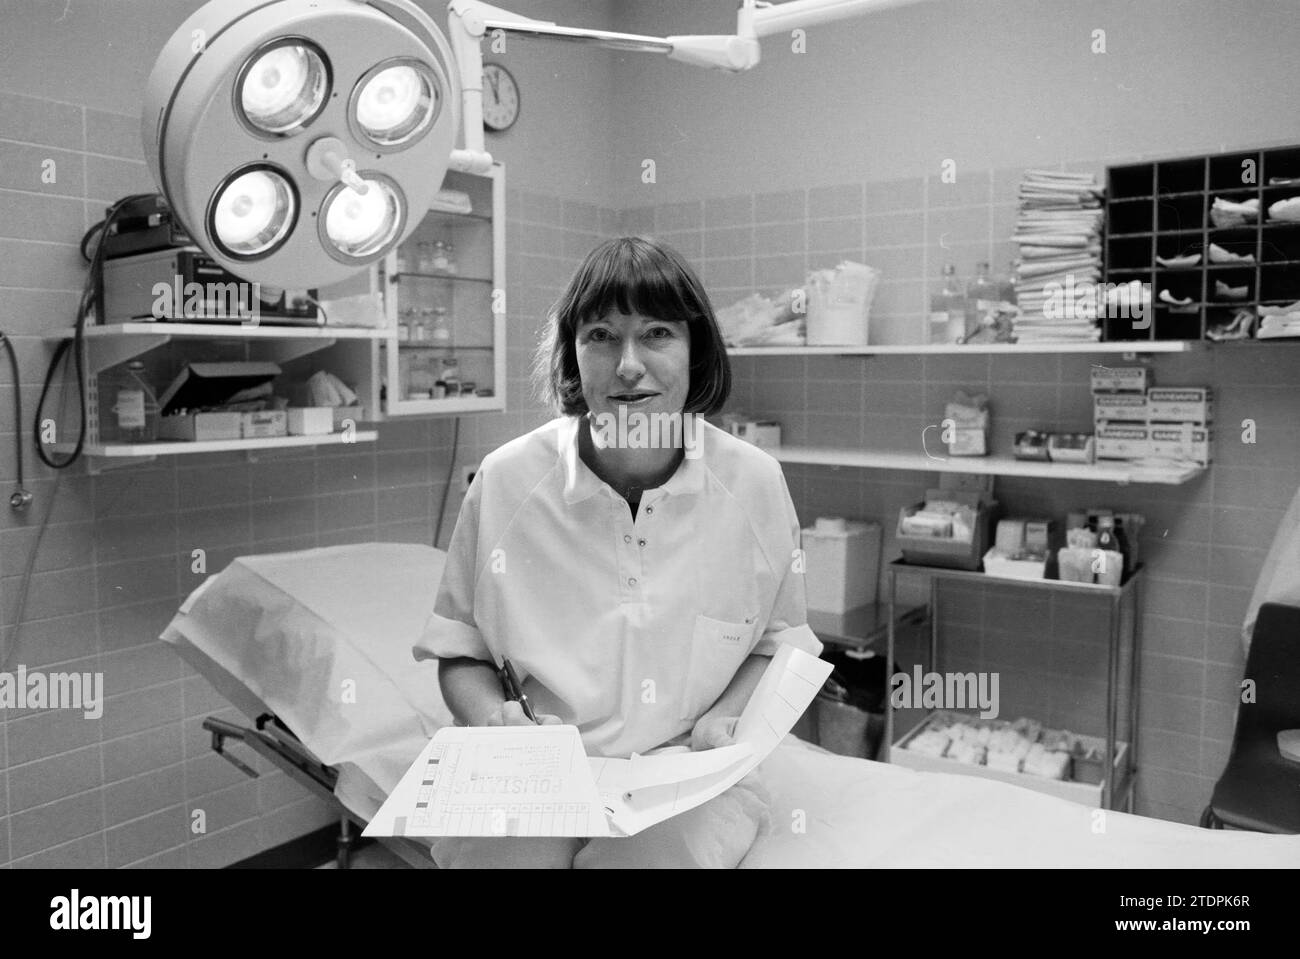 Nurse Linderman, Heemstede, Heemstede, The Netherlands, 22-12-1991, Whizgle News from the Past, Tailored for the Future. Explore historical narratives, Dutch The Netherlands agency image with a modern perspective, bridging the gap between yesterday's events and tomorrow's insights. A timeless journey shaping the stories that shape our future Stock Photo